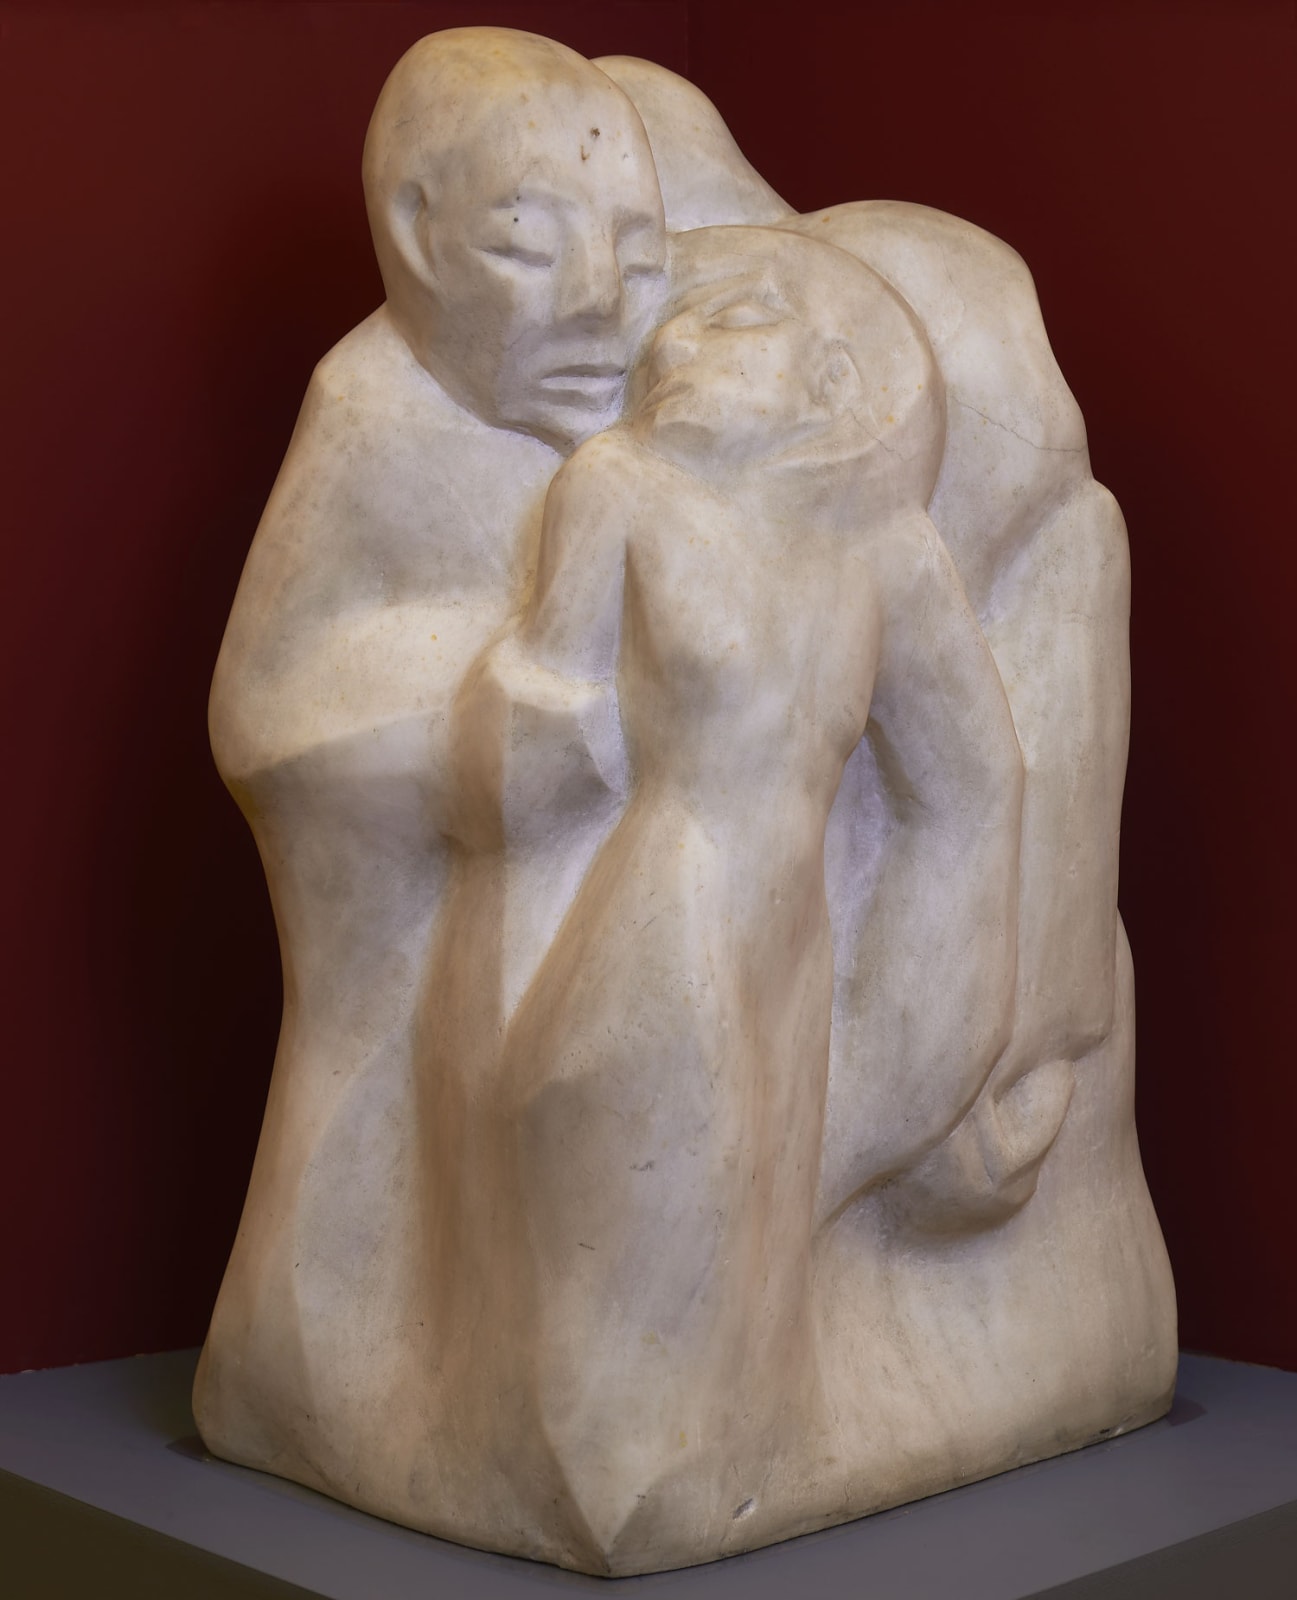 Edith Kiss (1905-1966) Untitled n.d. Marble 85 x 70 x 45 cm Ben Uri Collection © Edith Kiss estate To see and discover more about this artist click here